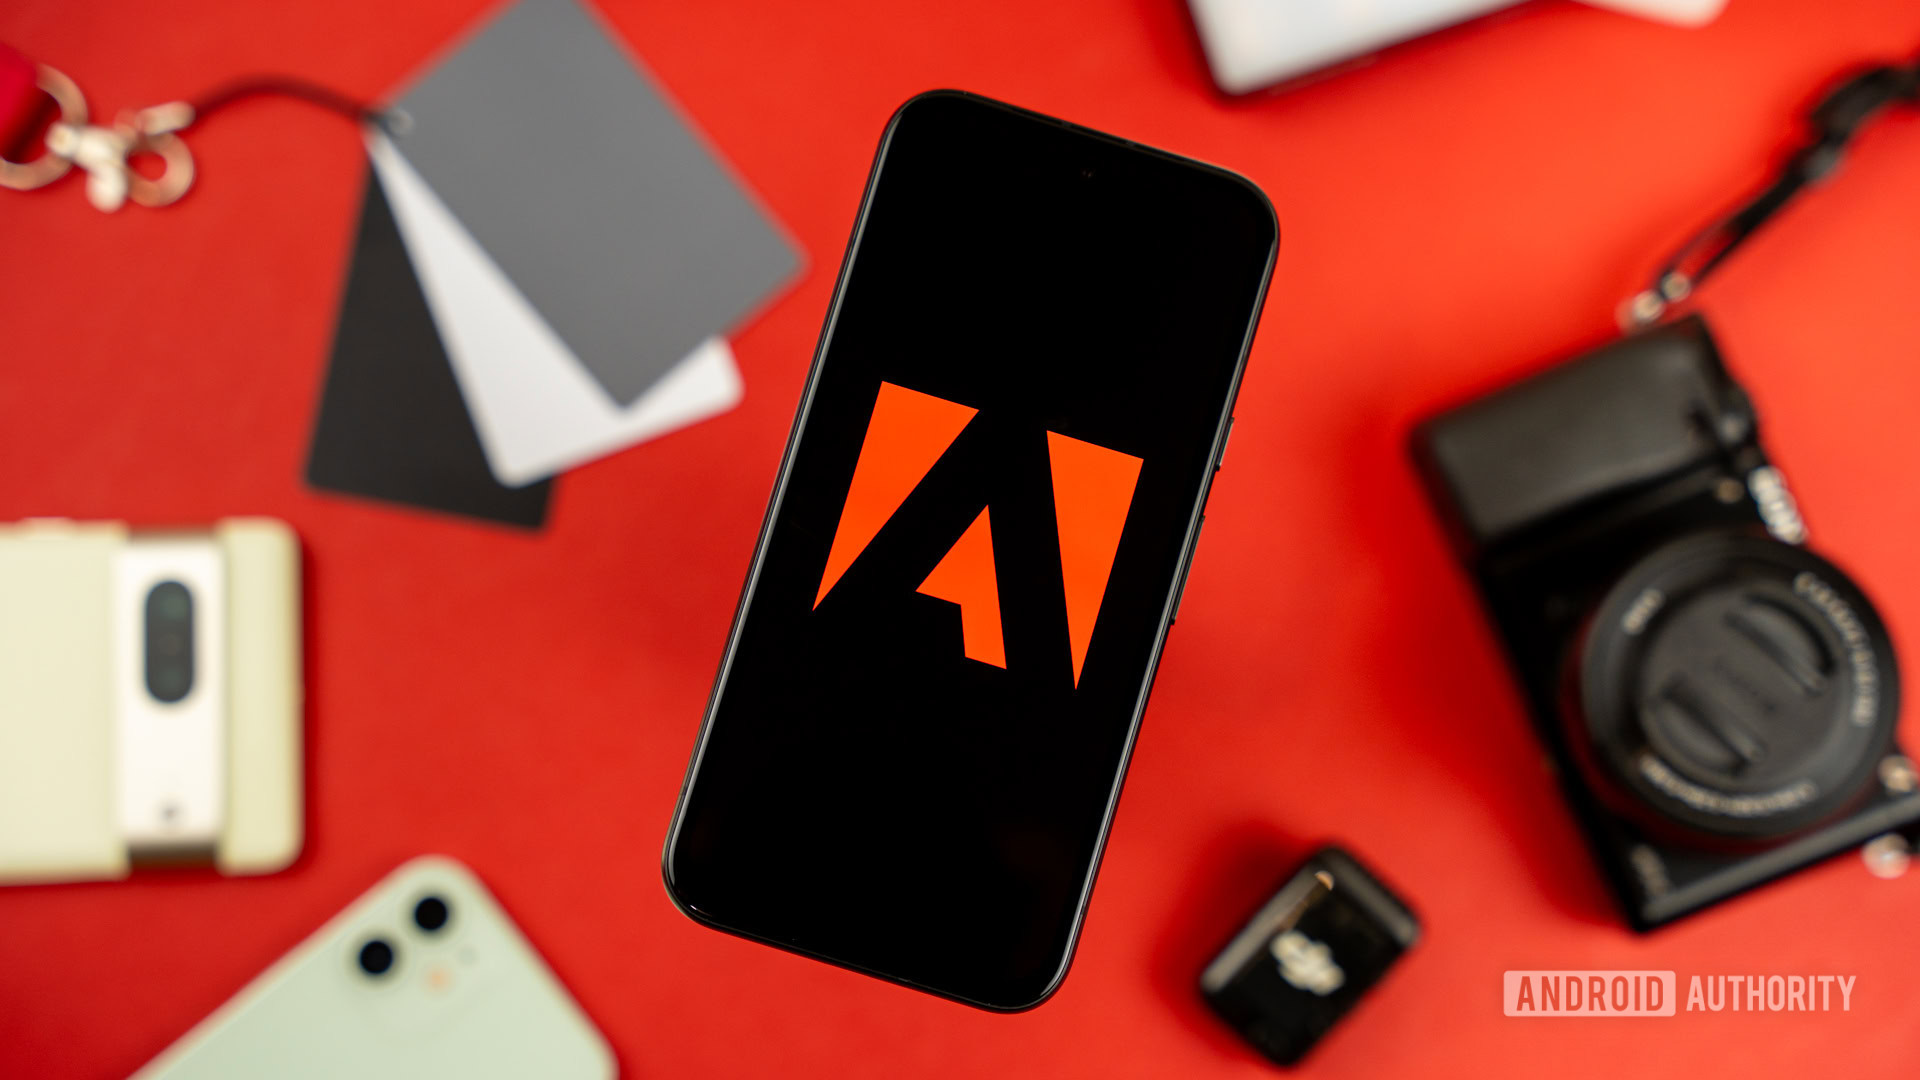 Adobe logo on smartphone, next to photography and videography products stock photo (5)